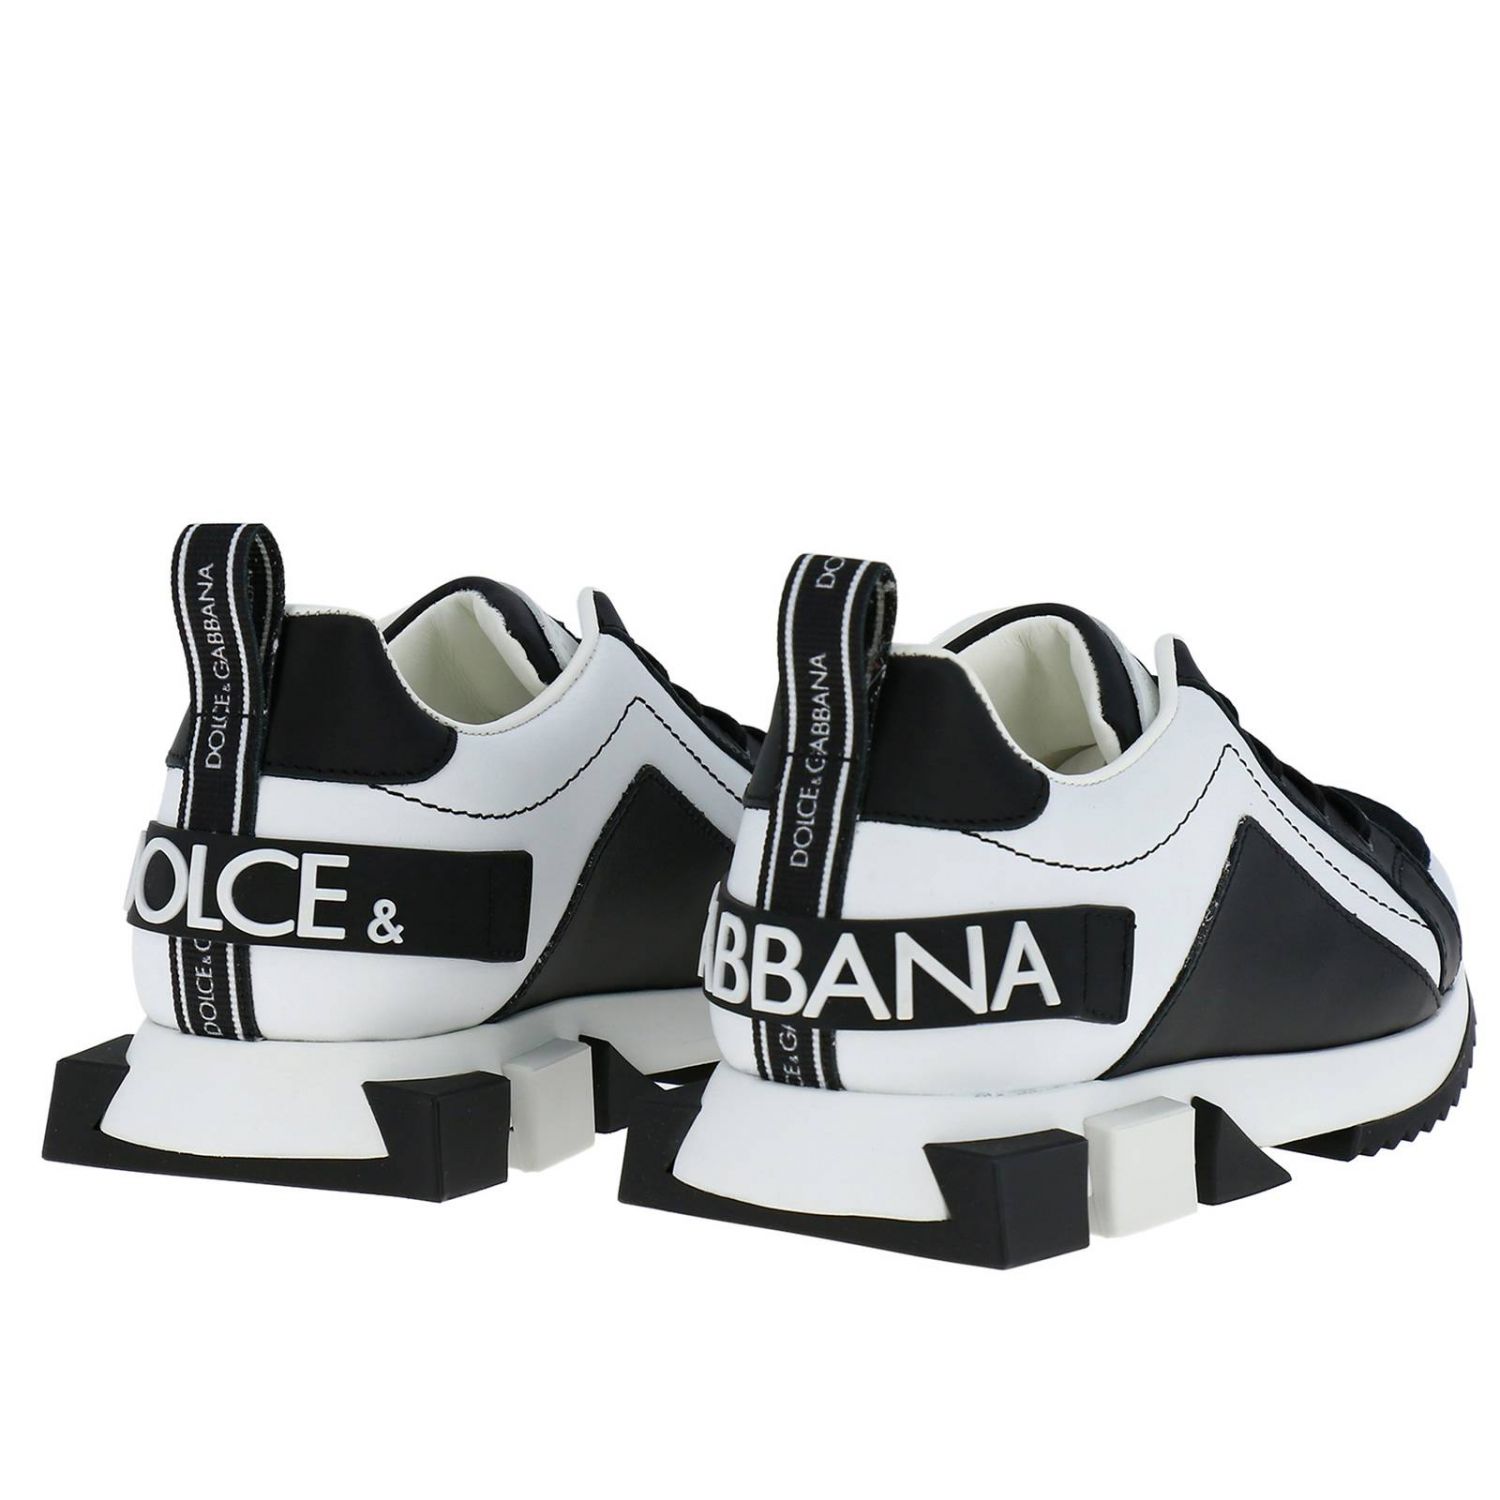 dolce & gabbana shoes for kids